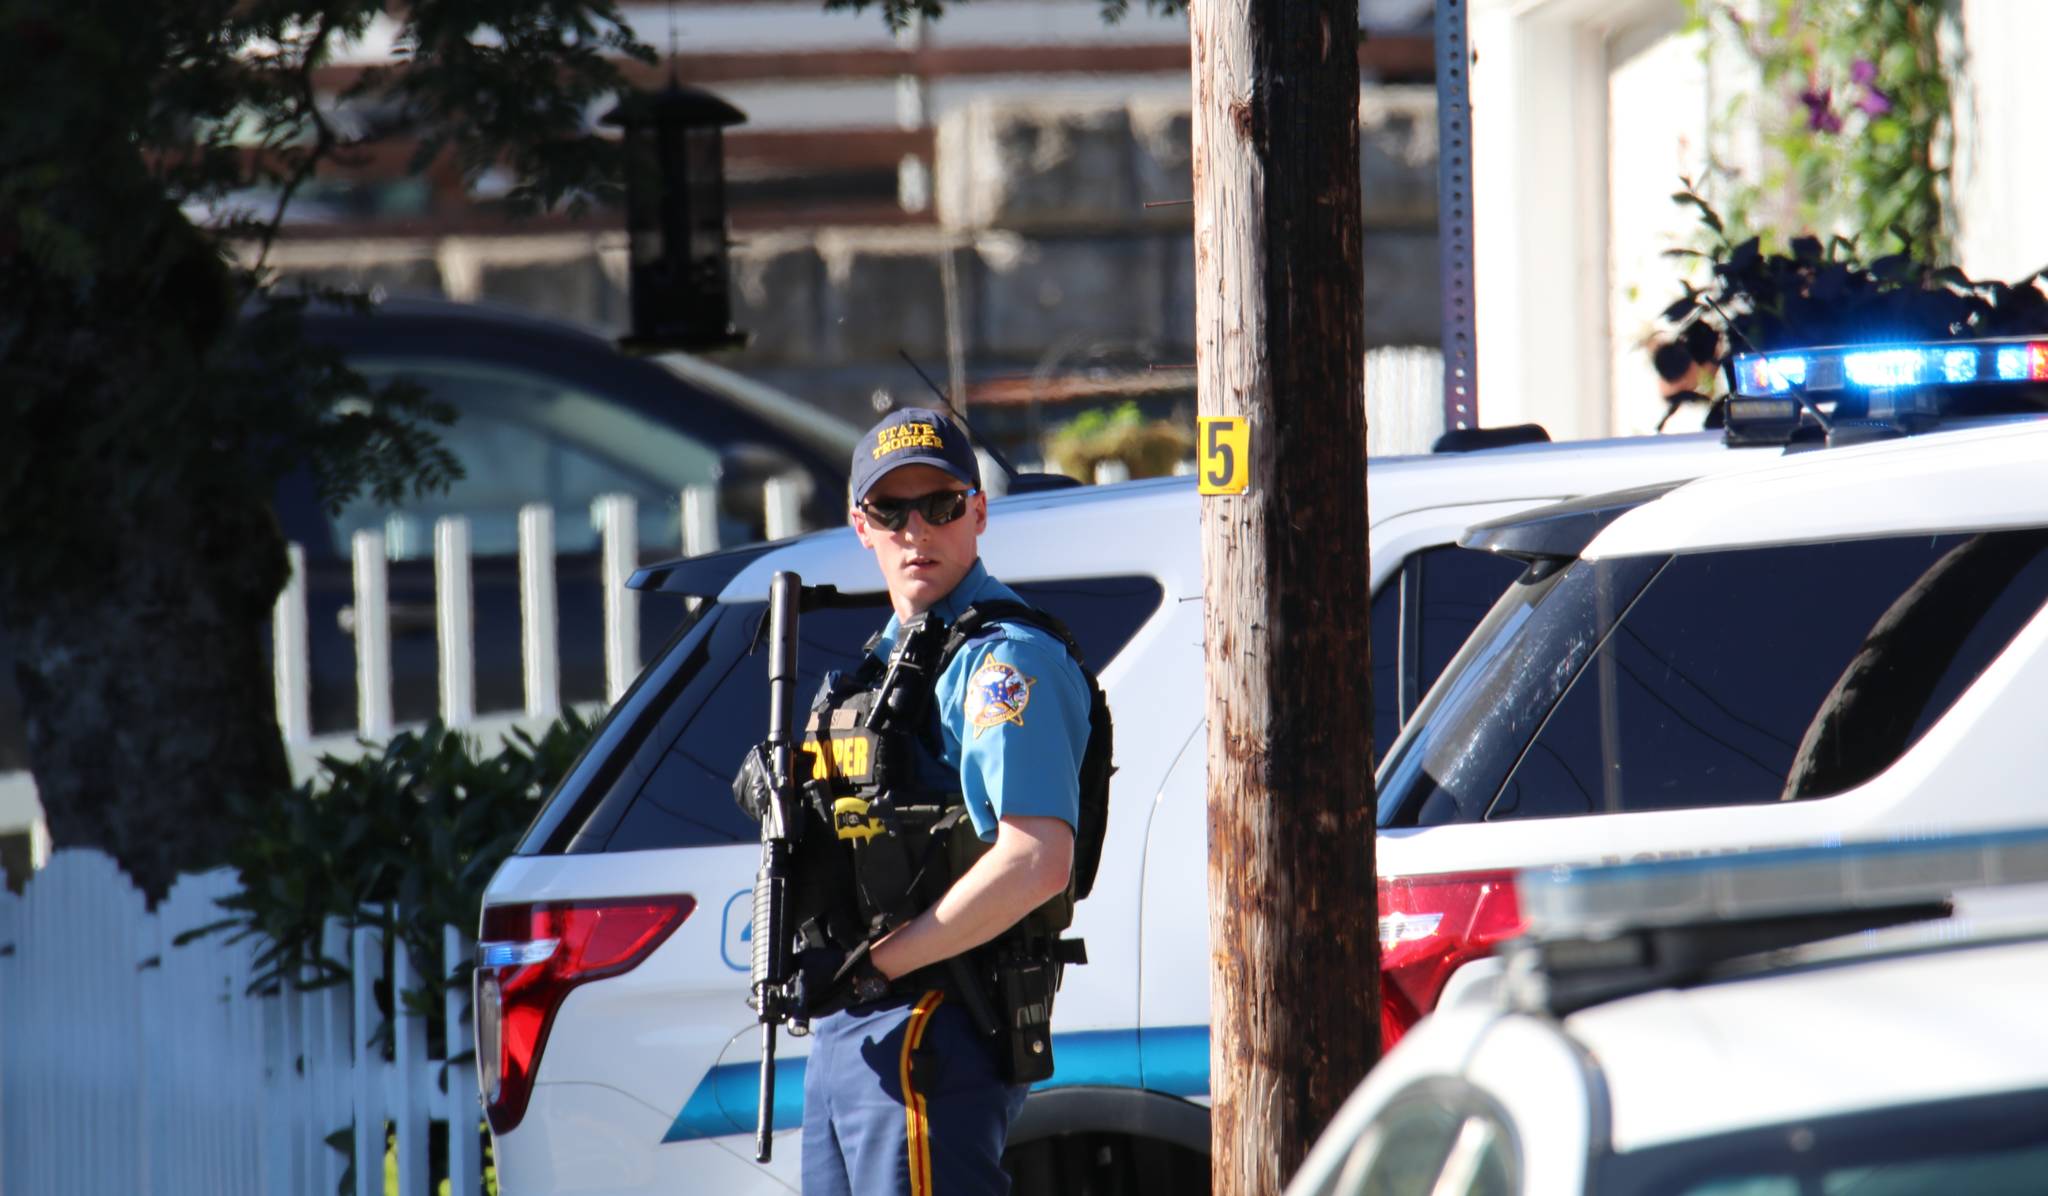 An Alaska State Trooper stands guard at the Fourth Street intersection to secure the perimeter while a search warrant is being served at 423 Fourth St. on Friday afternoon. (Photo courtesy of Matt Gruening)